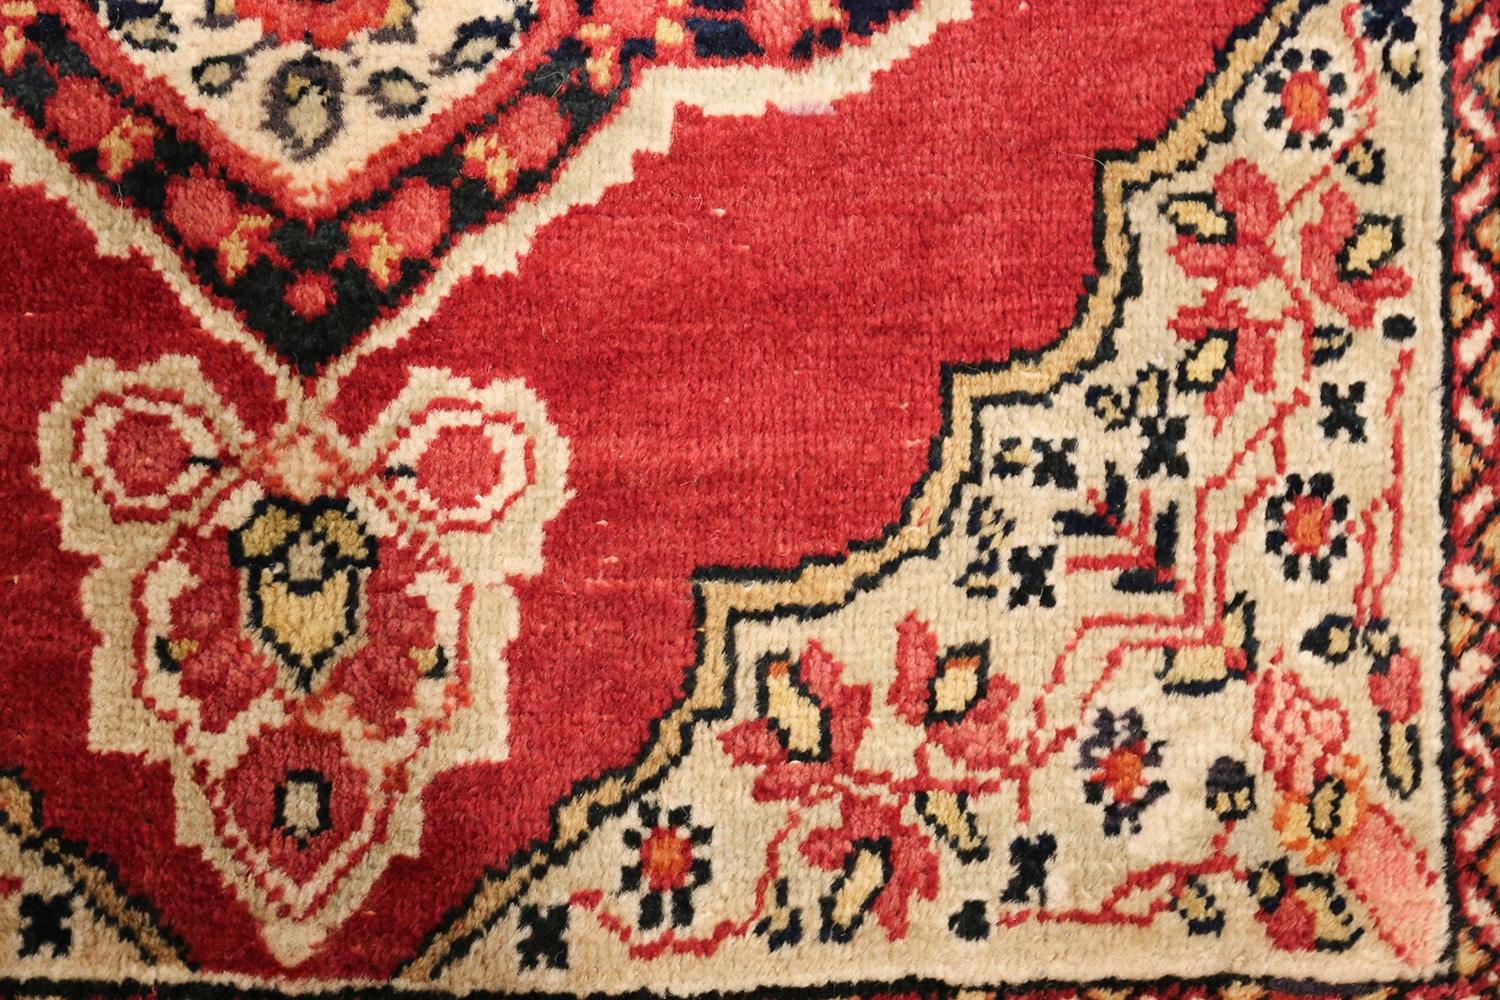 20th Century Small Mat Size Antique Persian Kerman Floral Rug. Size: 1 ft 10 in x 2 ft 6 in